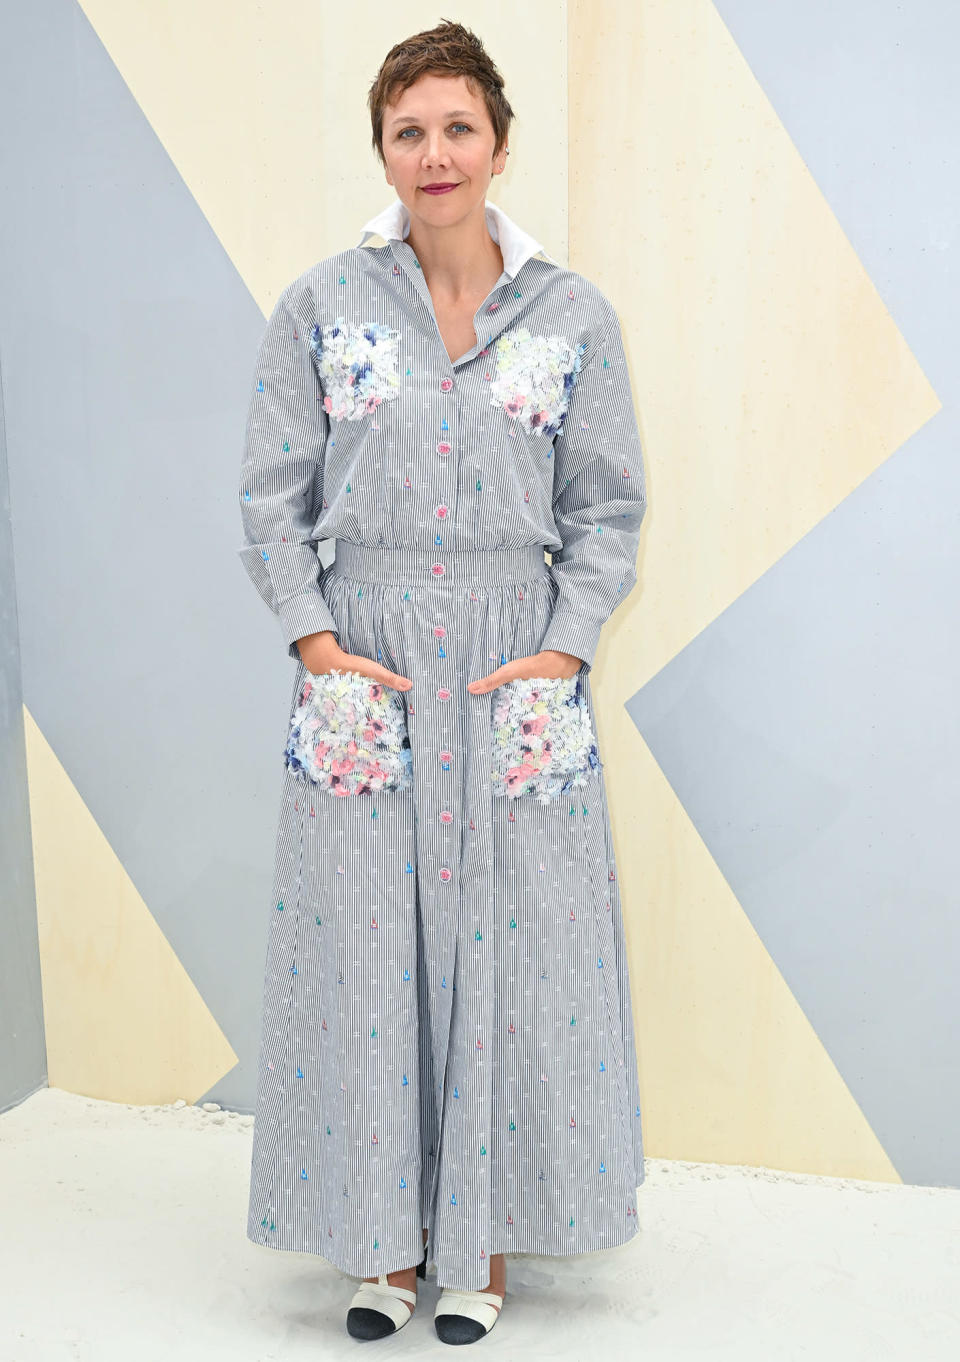 <p>Maggie Gyllenhaal wears a floor-length button-down dress at the Chanel presentation. The dress has pops of color on the buttons and pockets for an added bit of flair.</p>